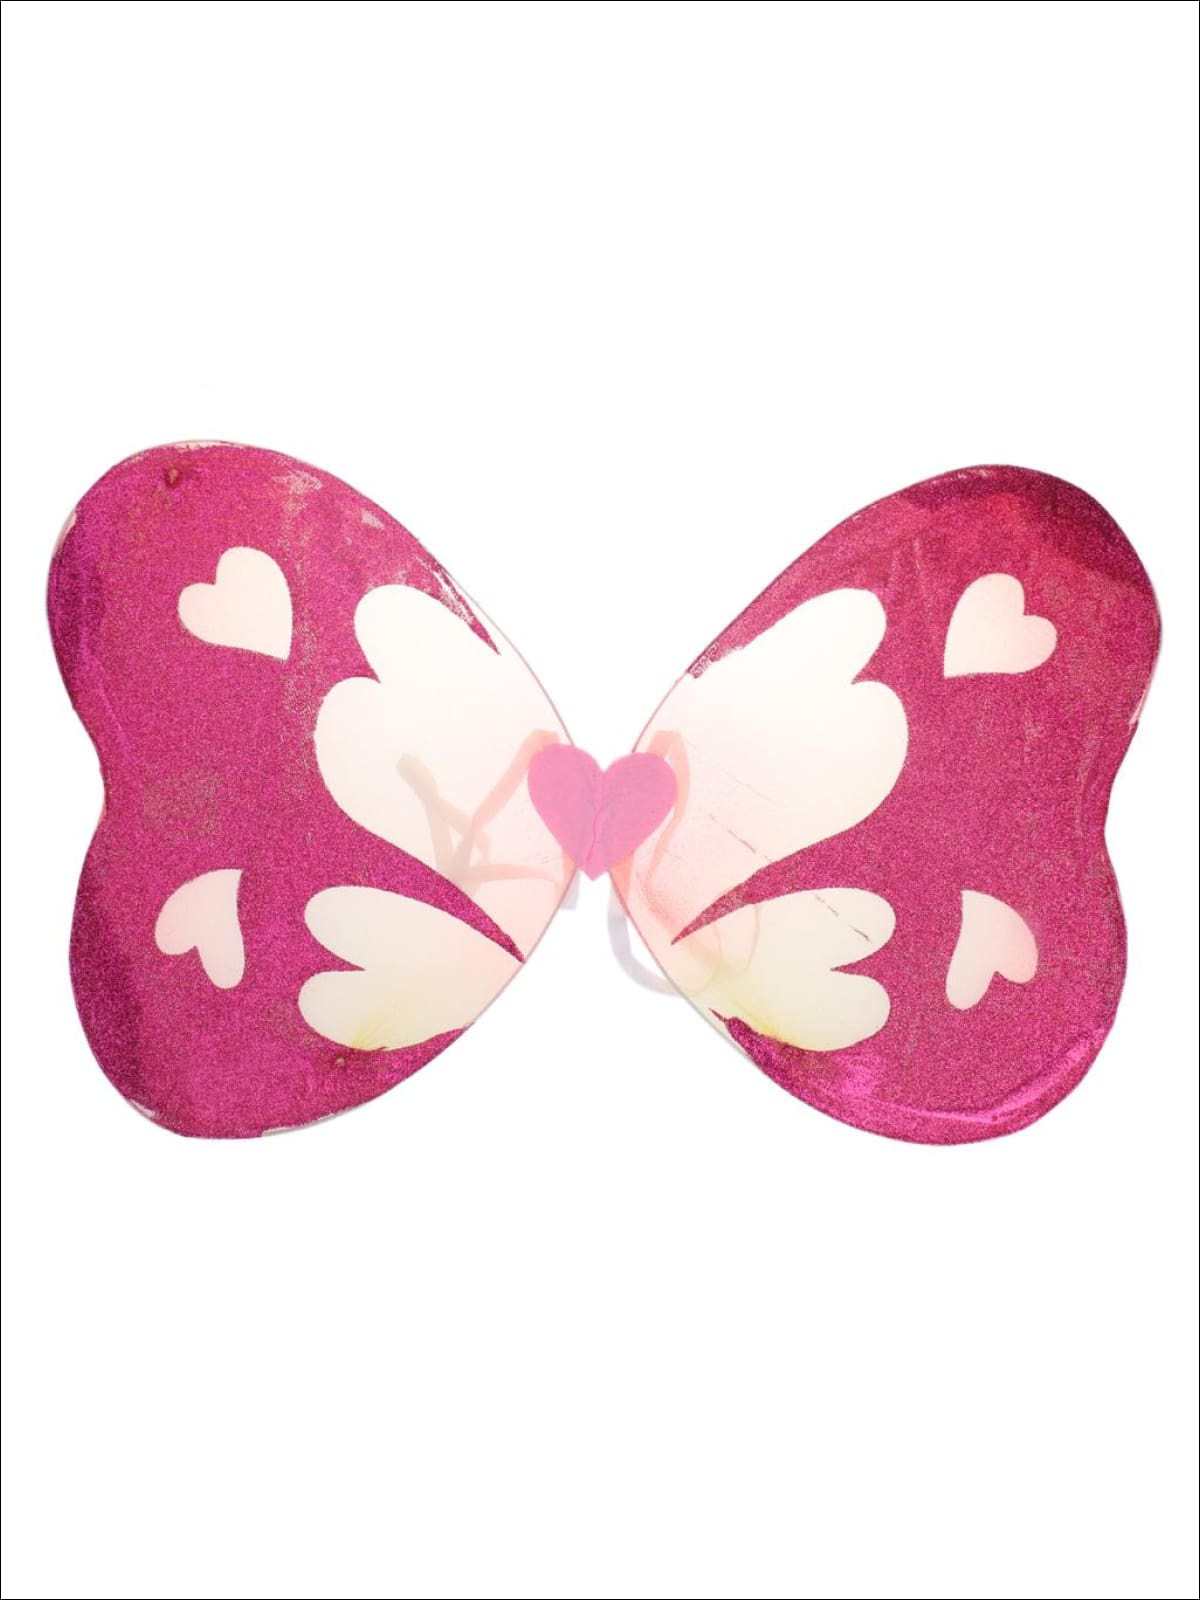 Girls Colorful Glitter Fairy Wings - Pink / One Size - Girls Halloween Costume